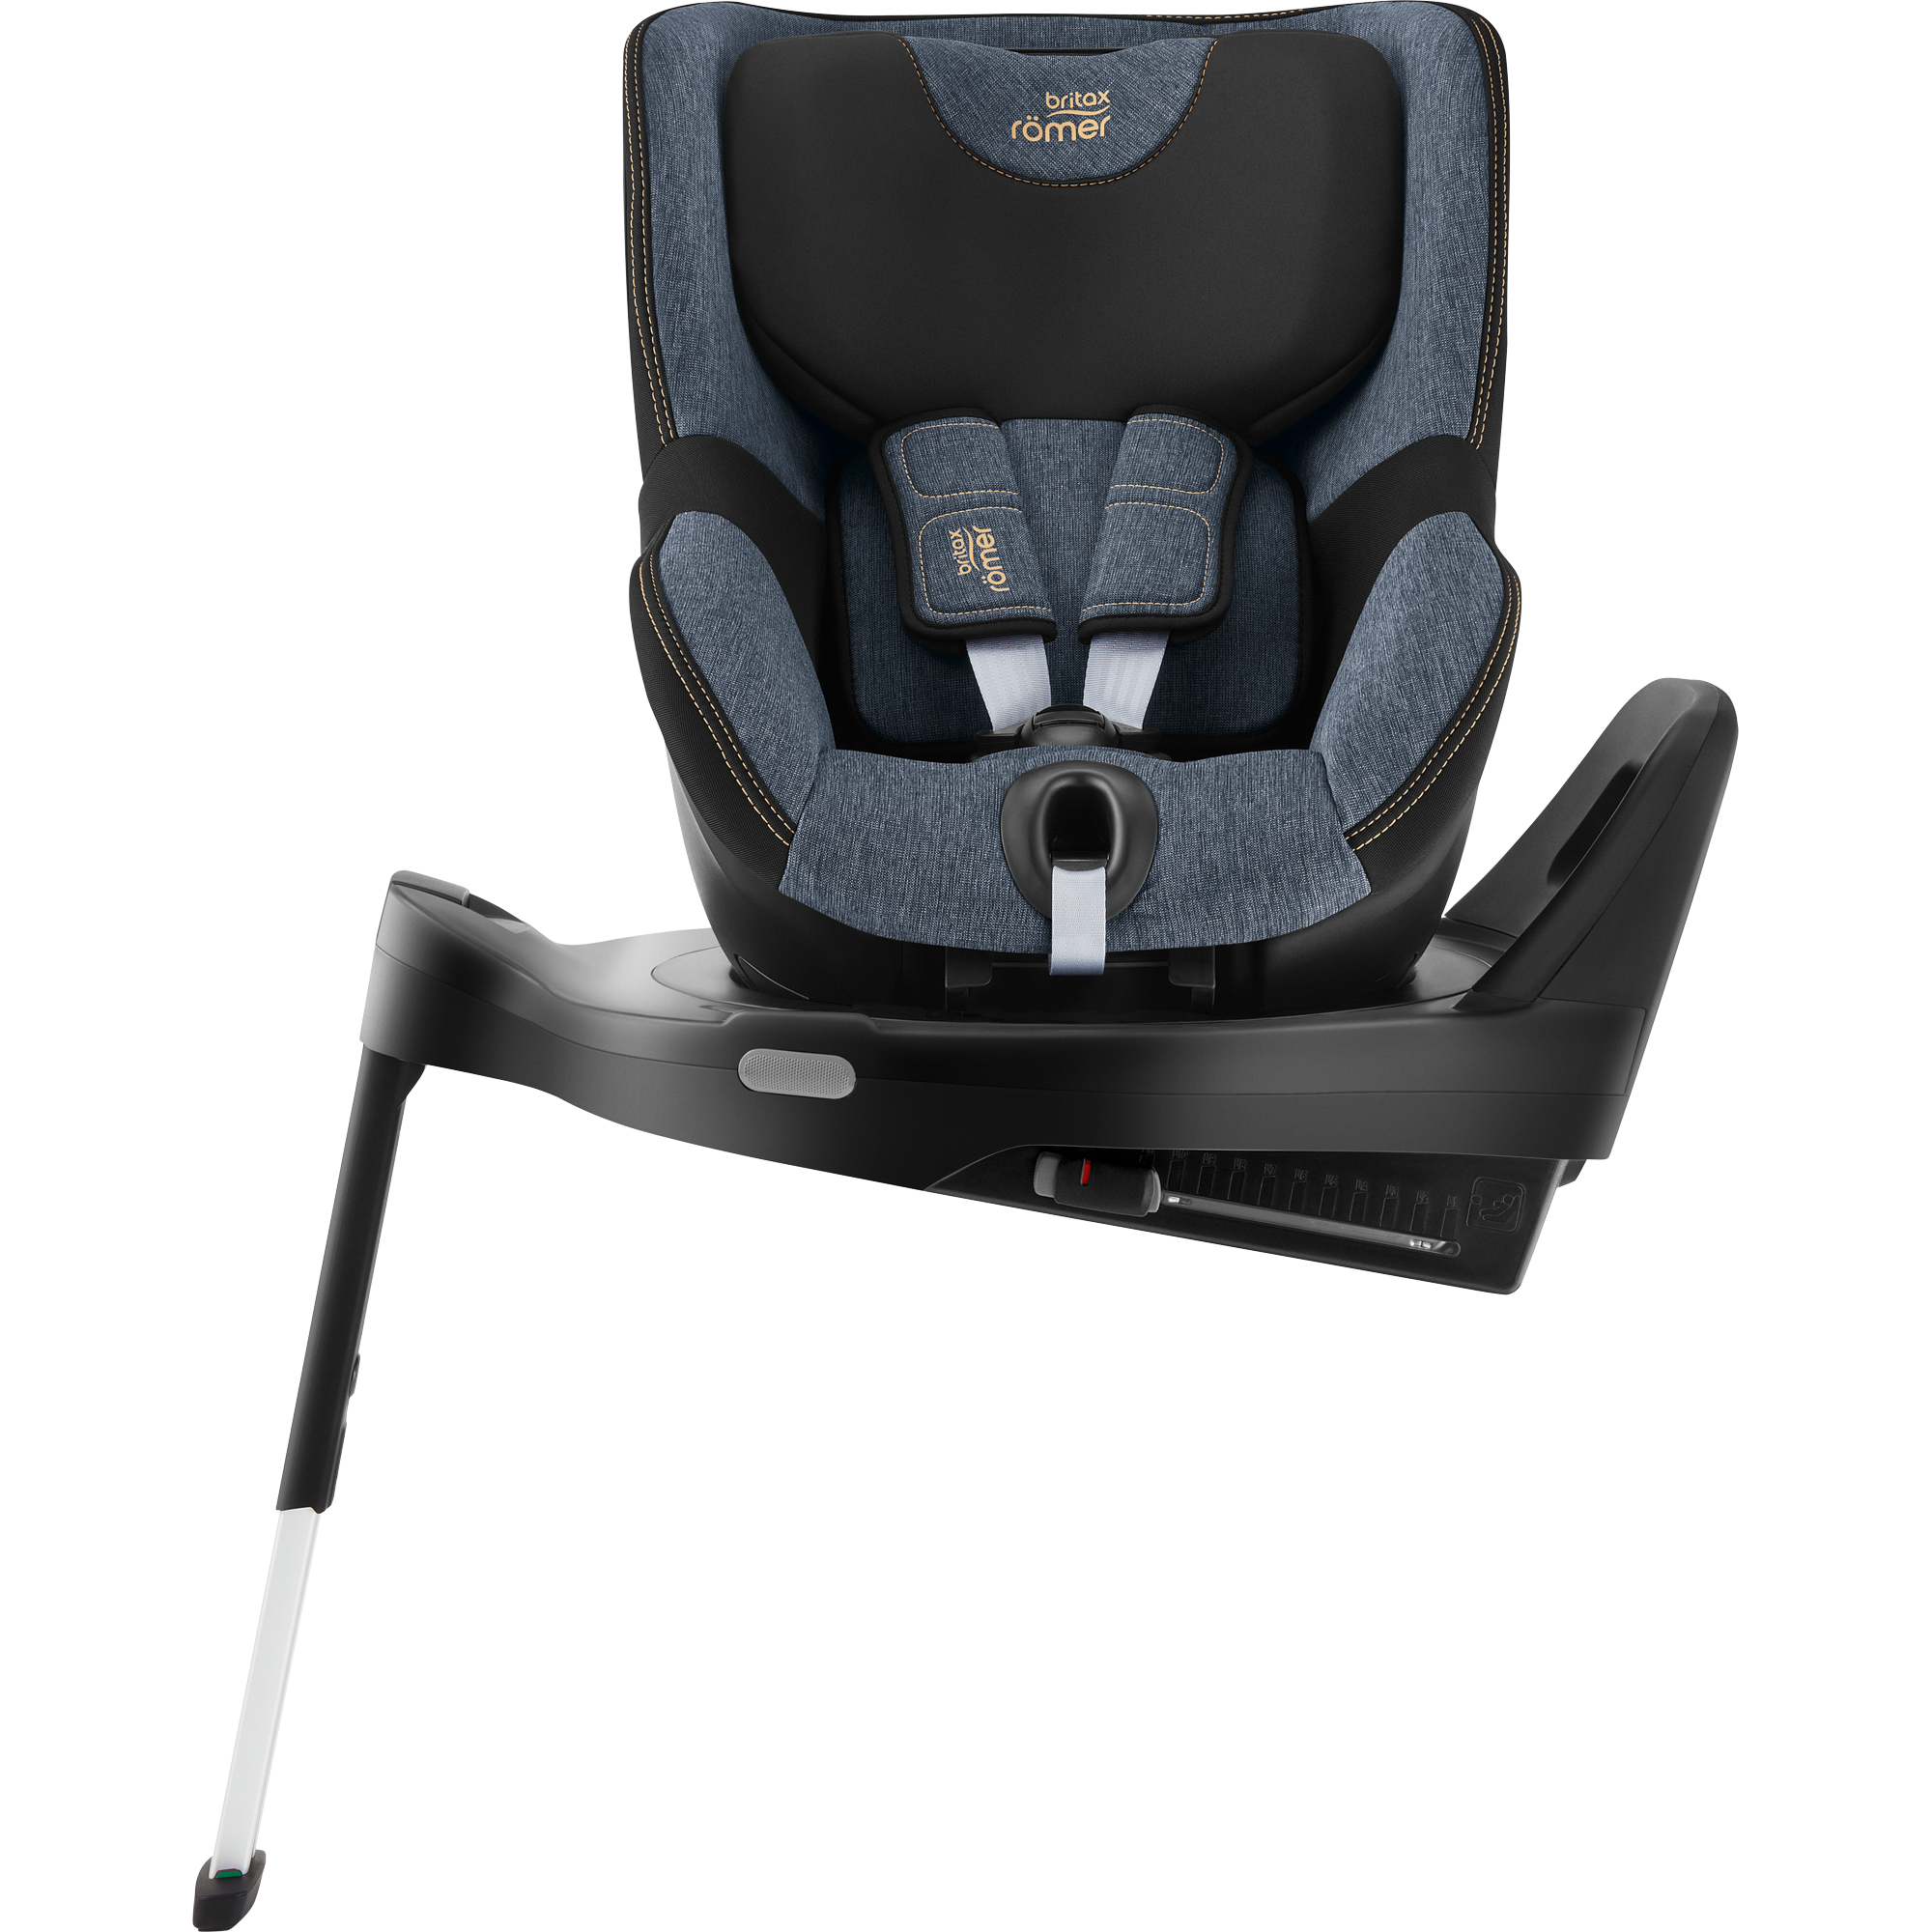 Introducing the new Britax DUALFIX M PLUS 🙌🏼 ▫️Suitable from 61cm-105cm  and up to 20kg ▫️Rotating isofix base for ease of putting baby in and out  of